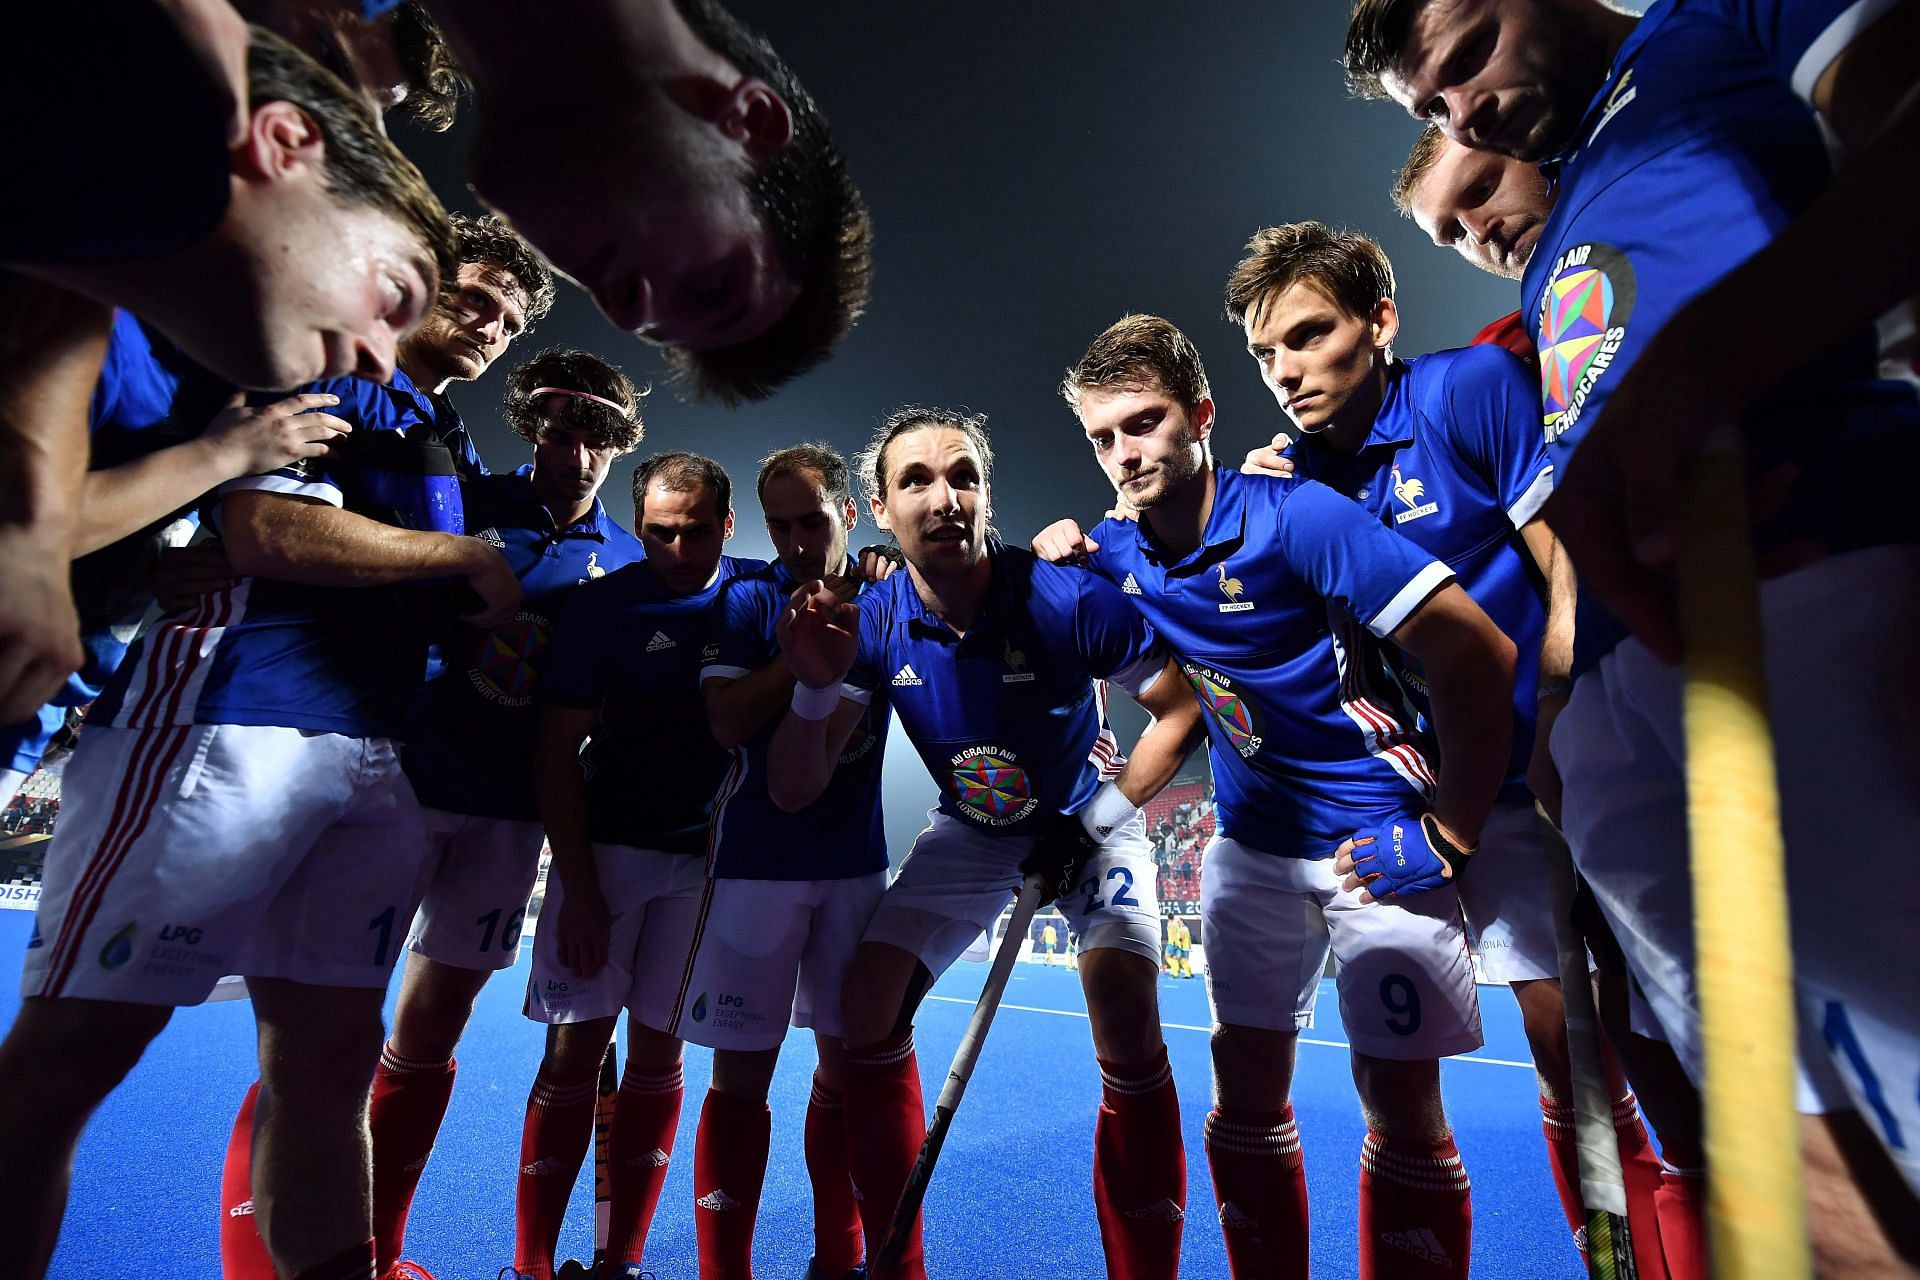 France has risen steadily and consistently to maintain their top-10 ranking